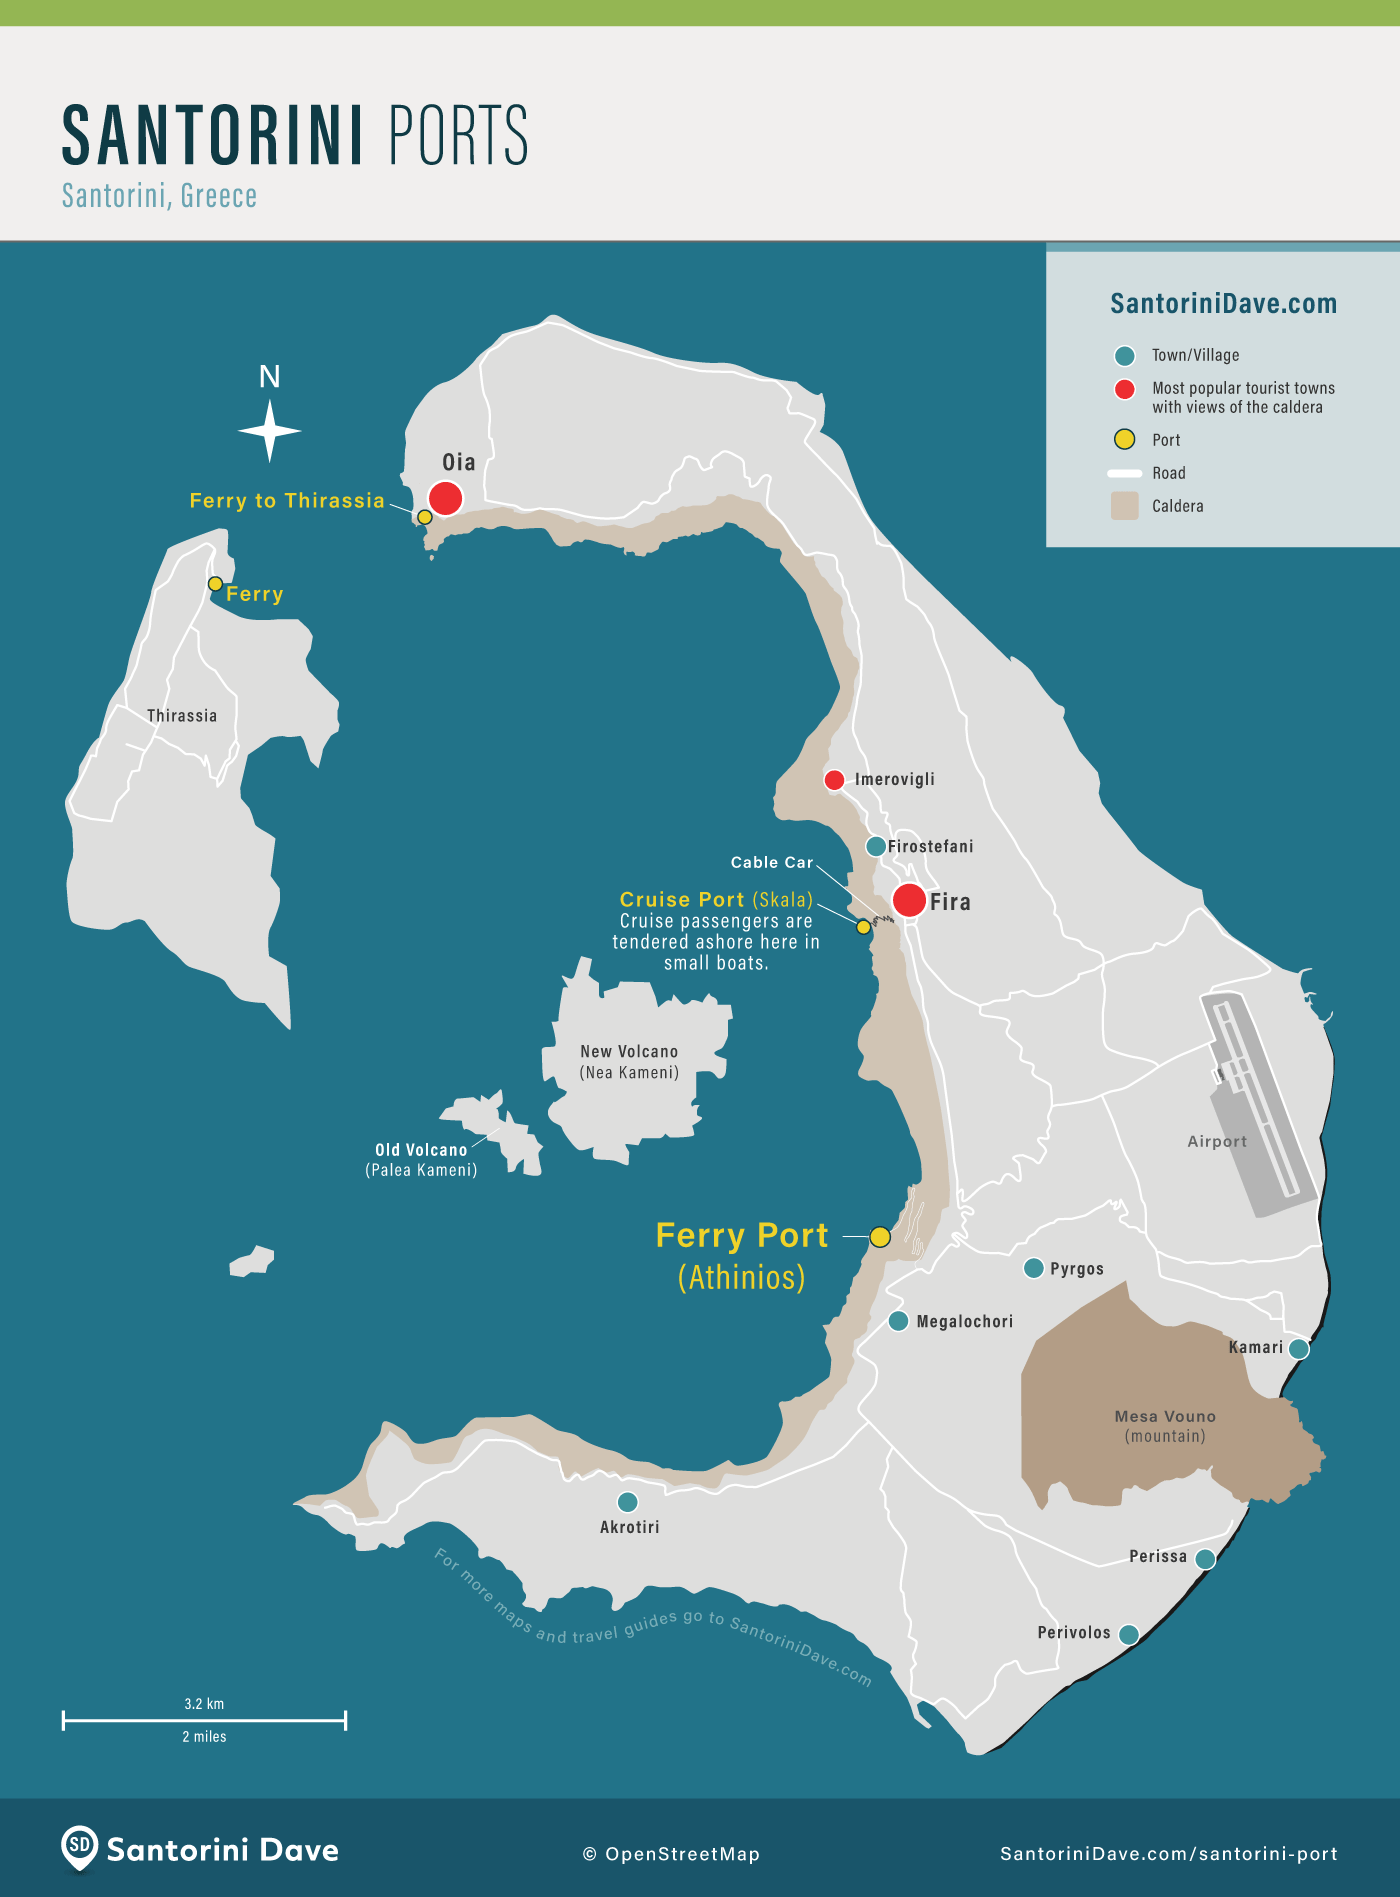 Map of Santorini with both ports and all major towns indicated